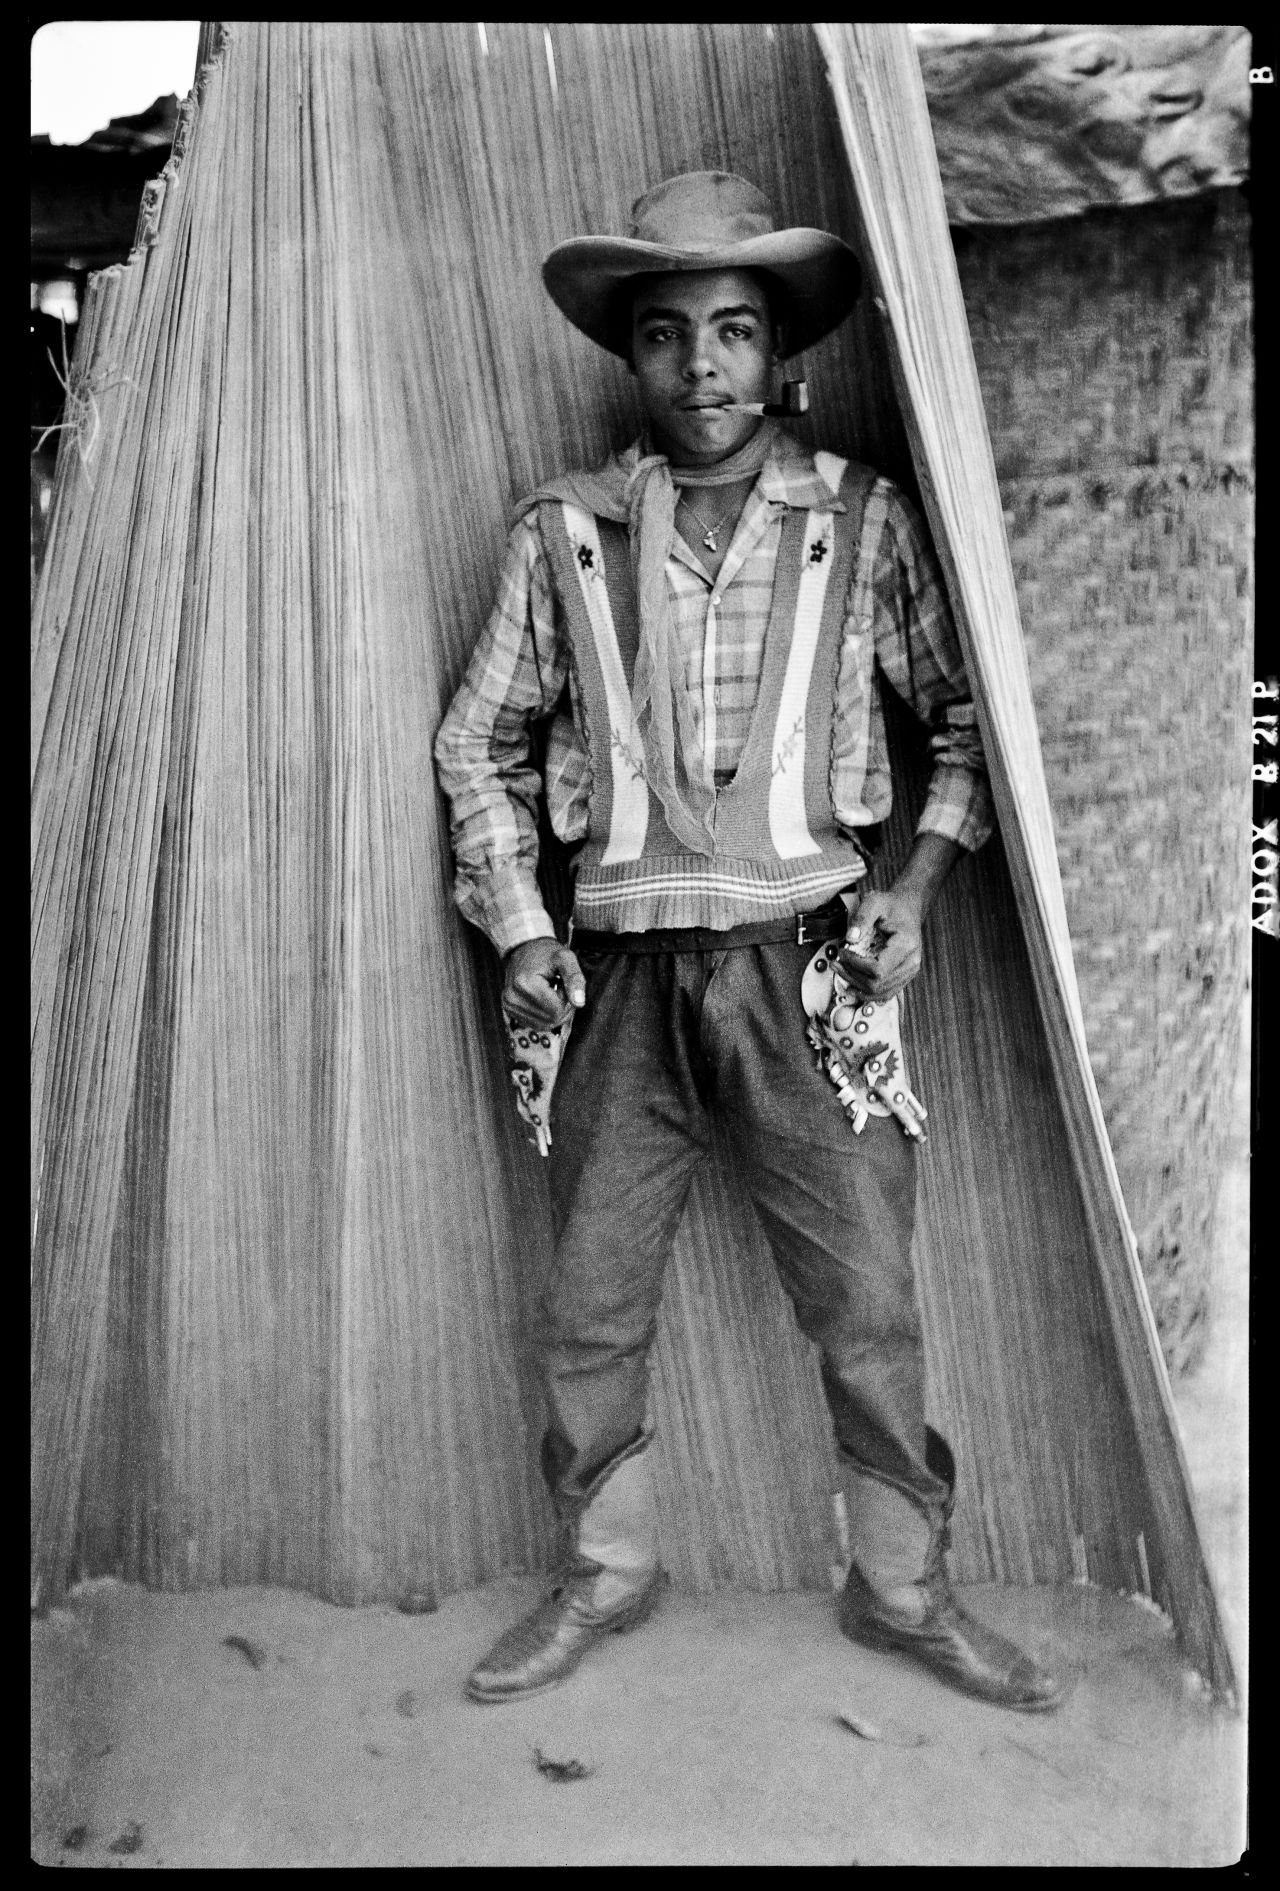 Bill and photographer Jean Depara made Kinshasa his canvas in the 1950s, capturing cowboys like Andrada in the urban neighborhoods they staunchly defended. Depara was an erstwhile shoemaker until 1953, first taking up the camera at his wedding in 1950, when he bought a small  Adox camera to record the occasion. His lens would go on to detail myriad examples of pop culture in the bubbling metropolis, but his series on the Bills is among his most famous.